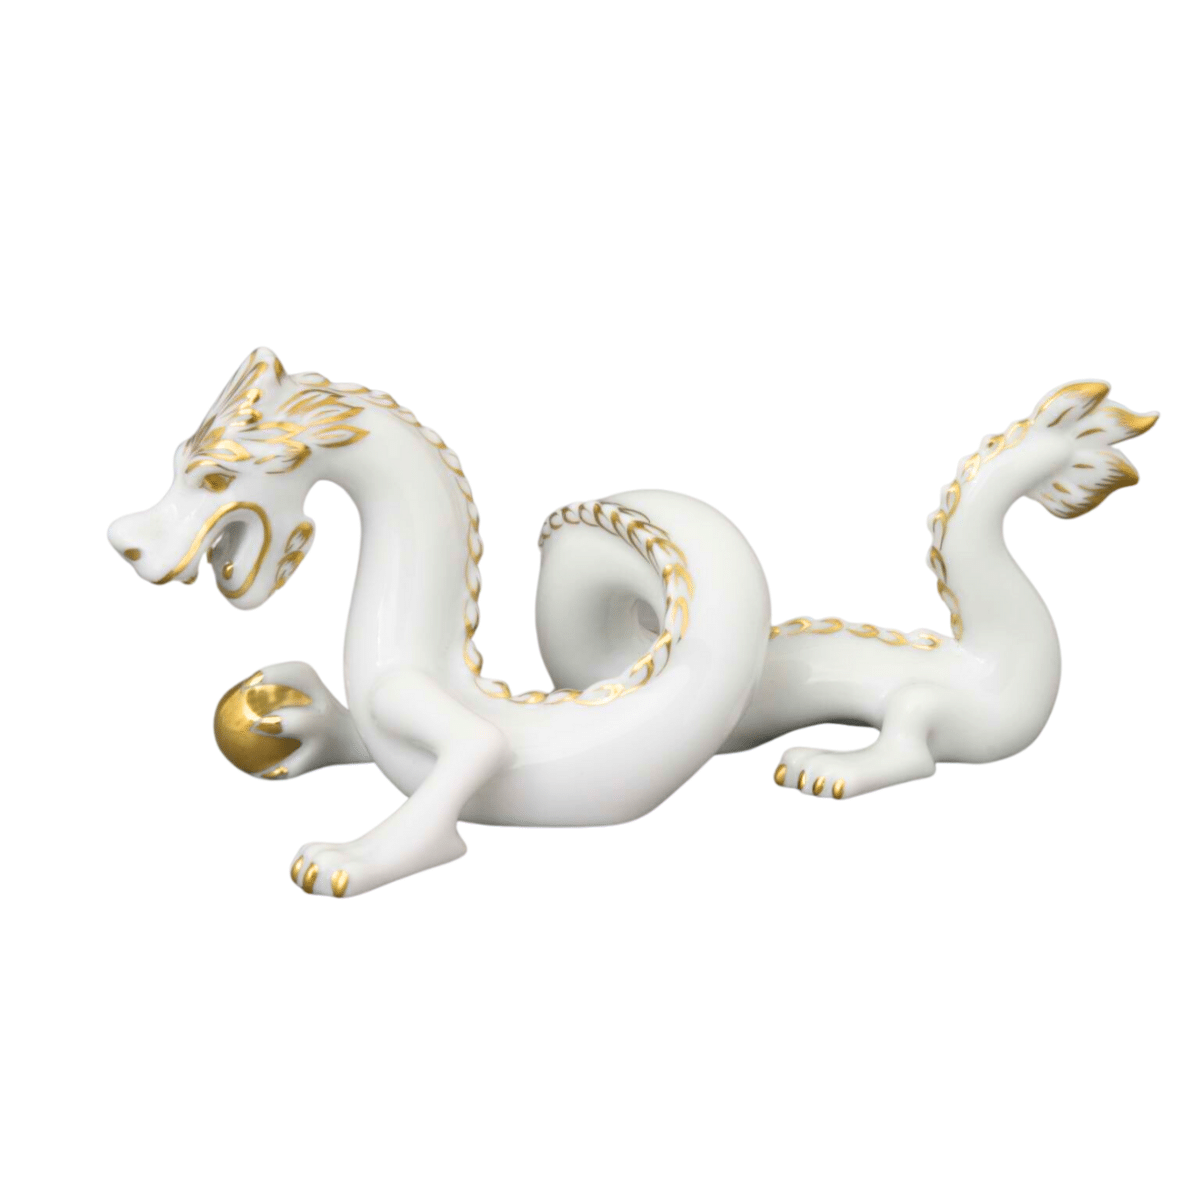 Herend-White-Dragon-Figurine-15070-0-00-A-OR